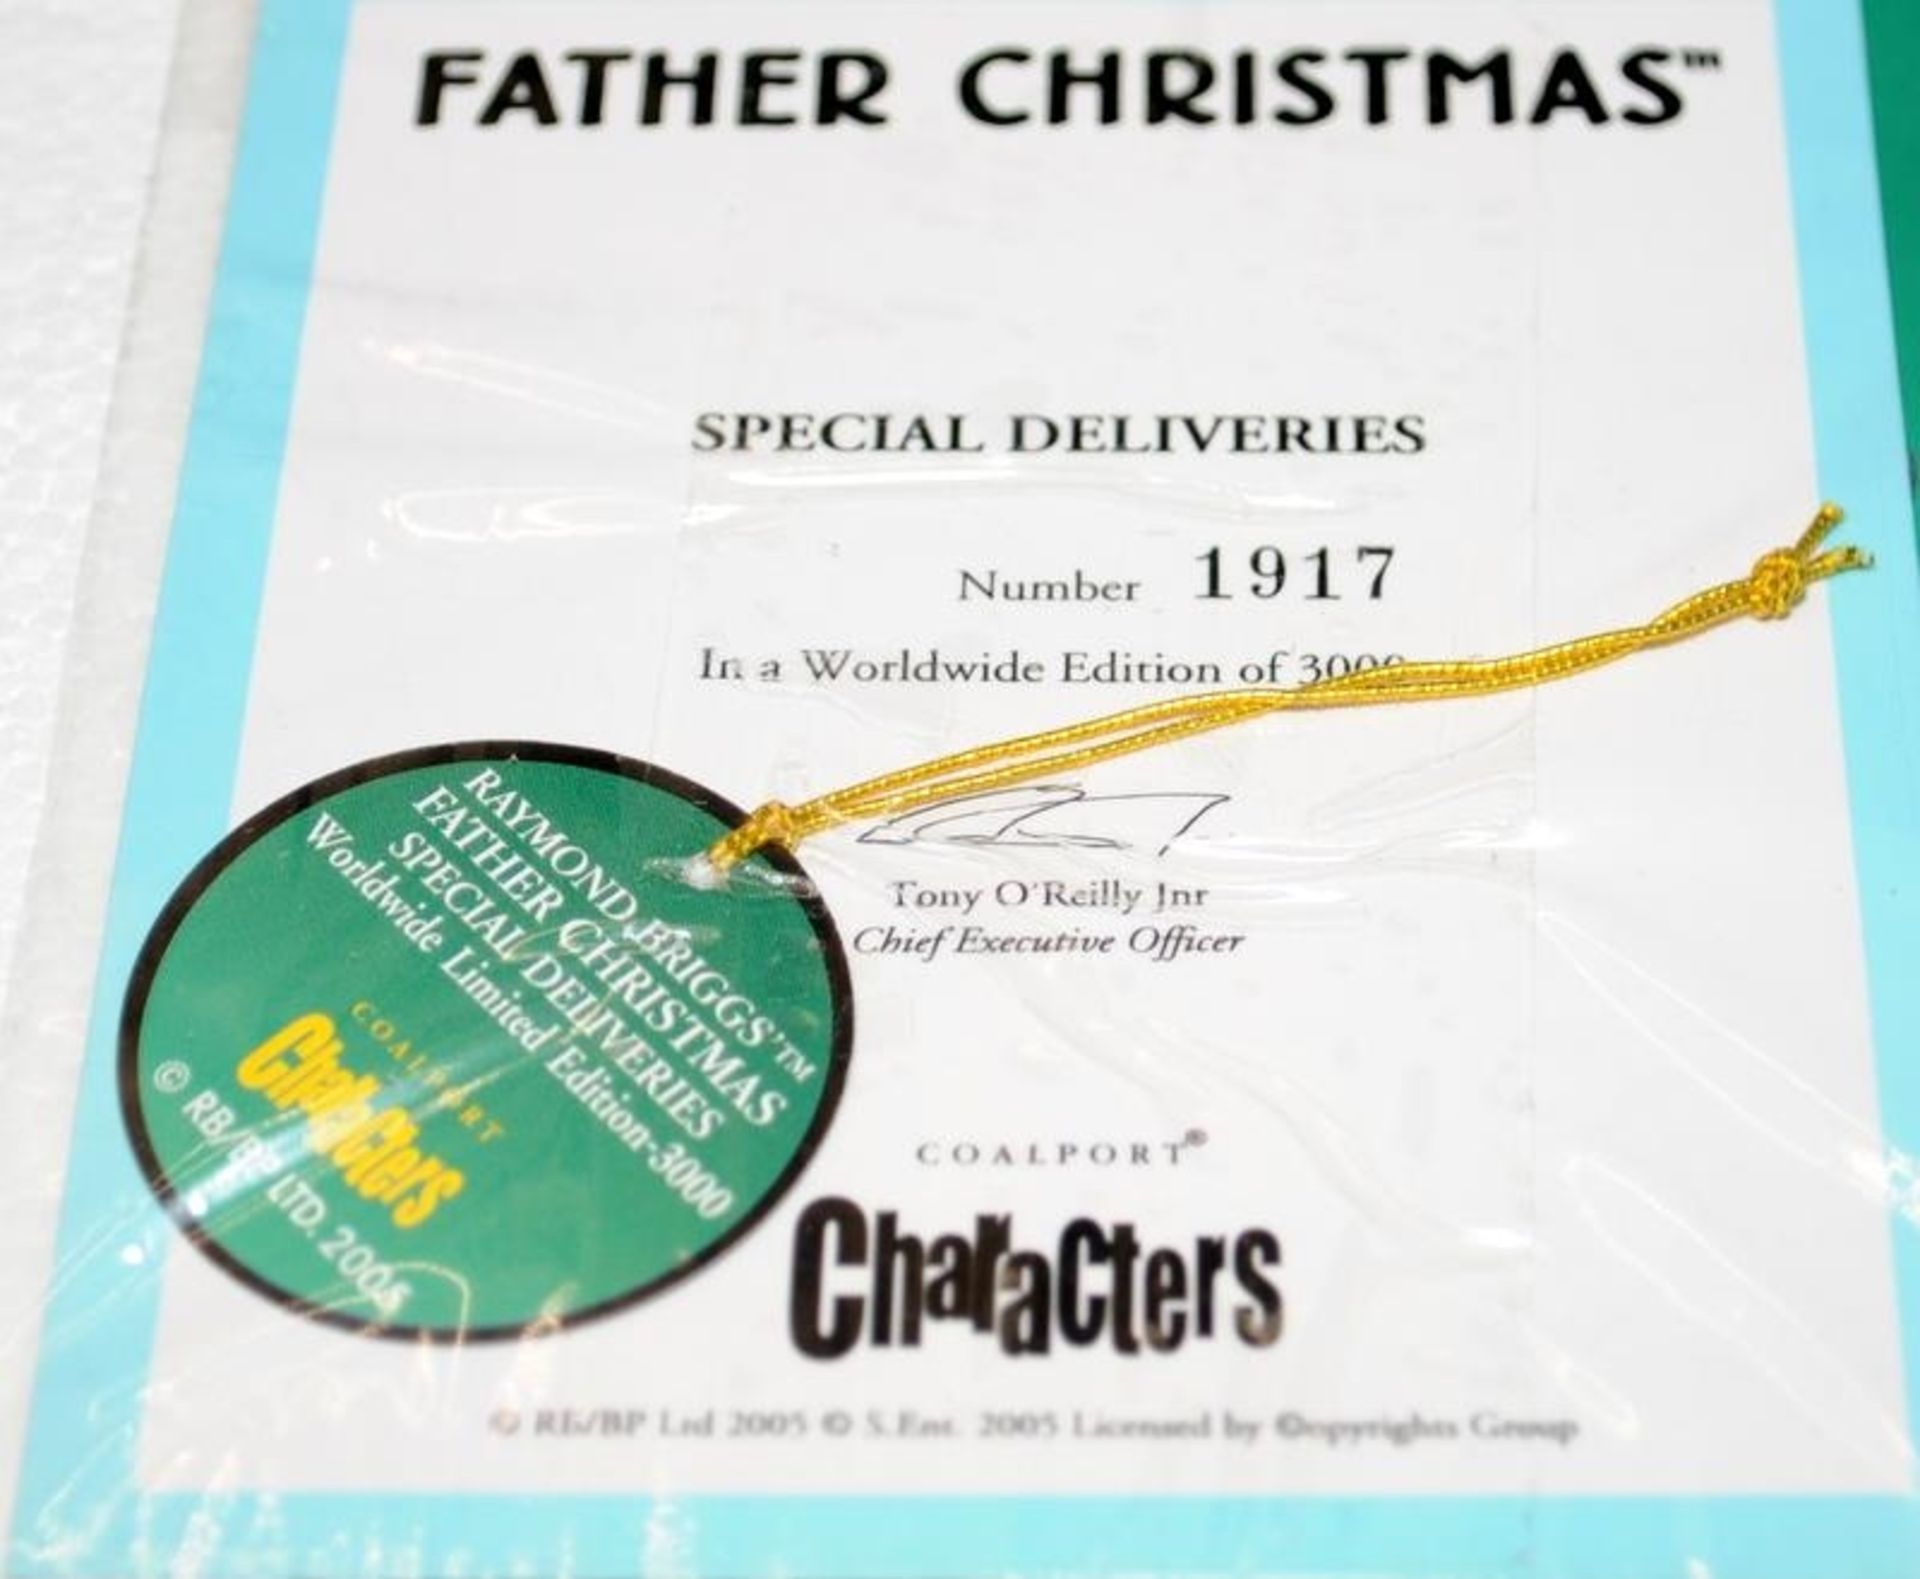 2 x Coalport Characters Raymond Briggs Father Christmas figurines: Time For A Break c/w Special - Image 3 of 6